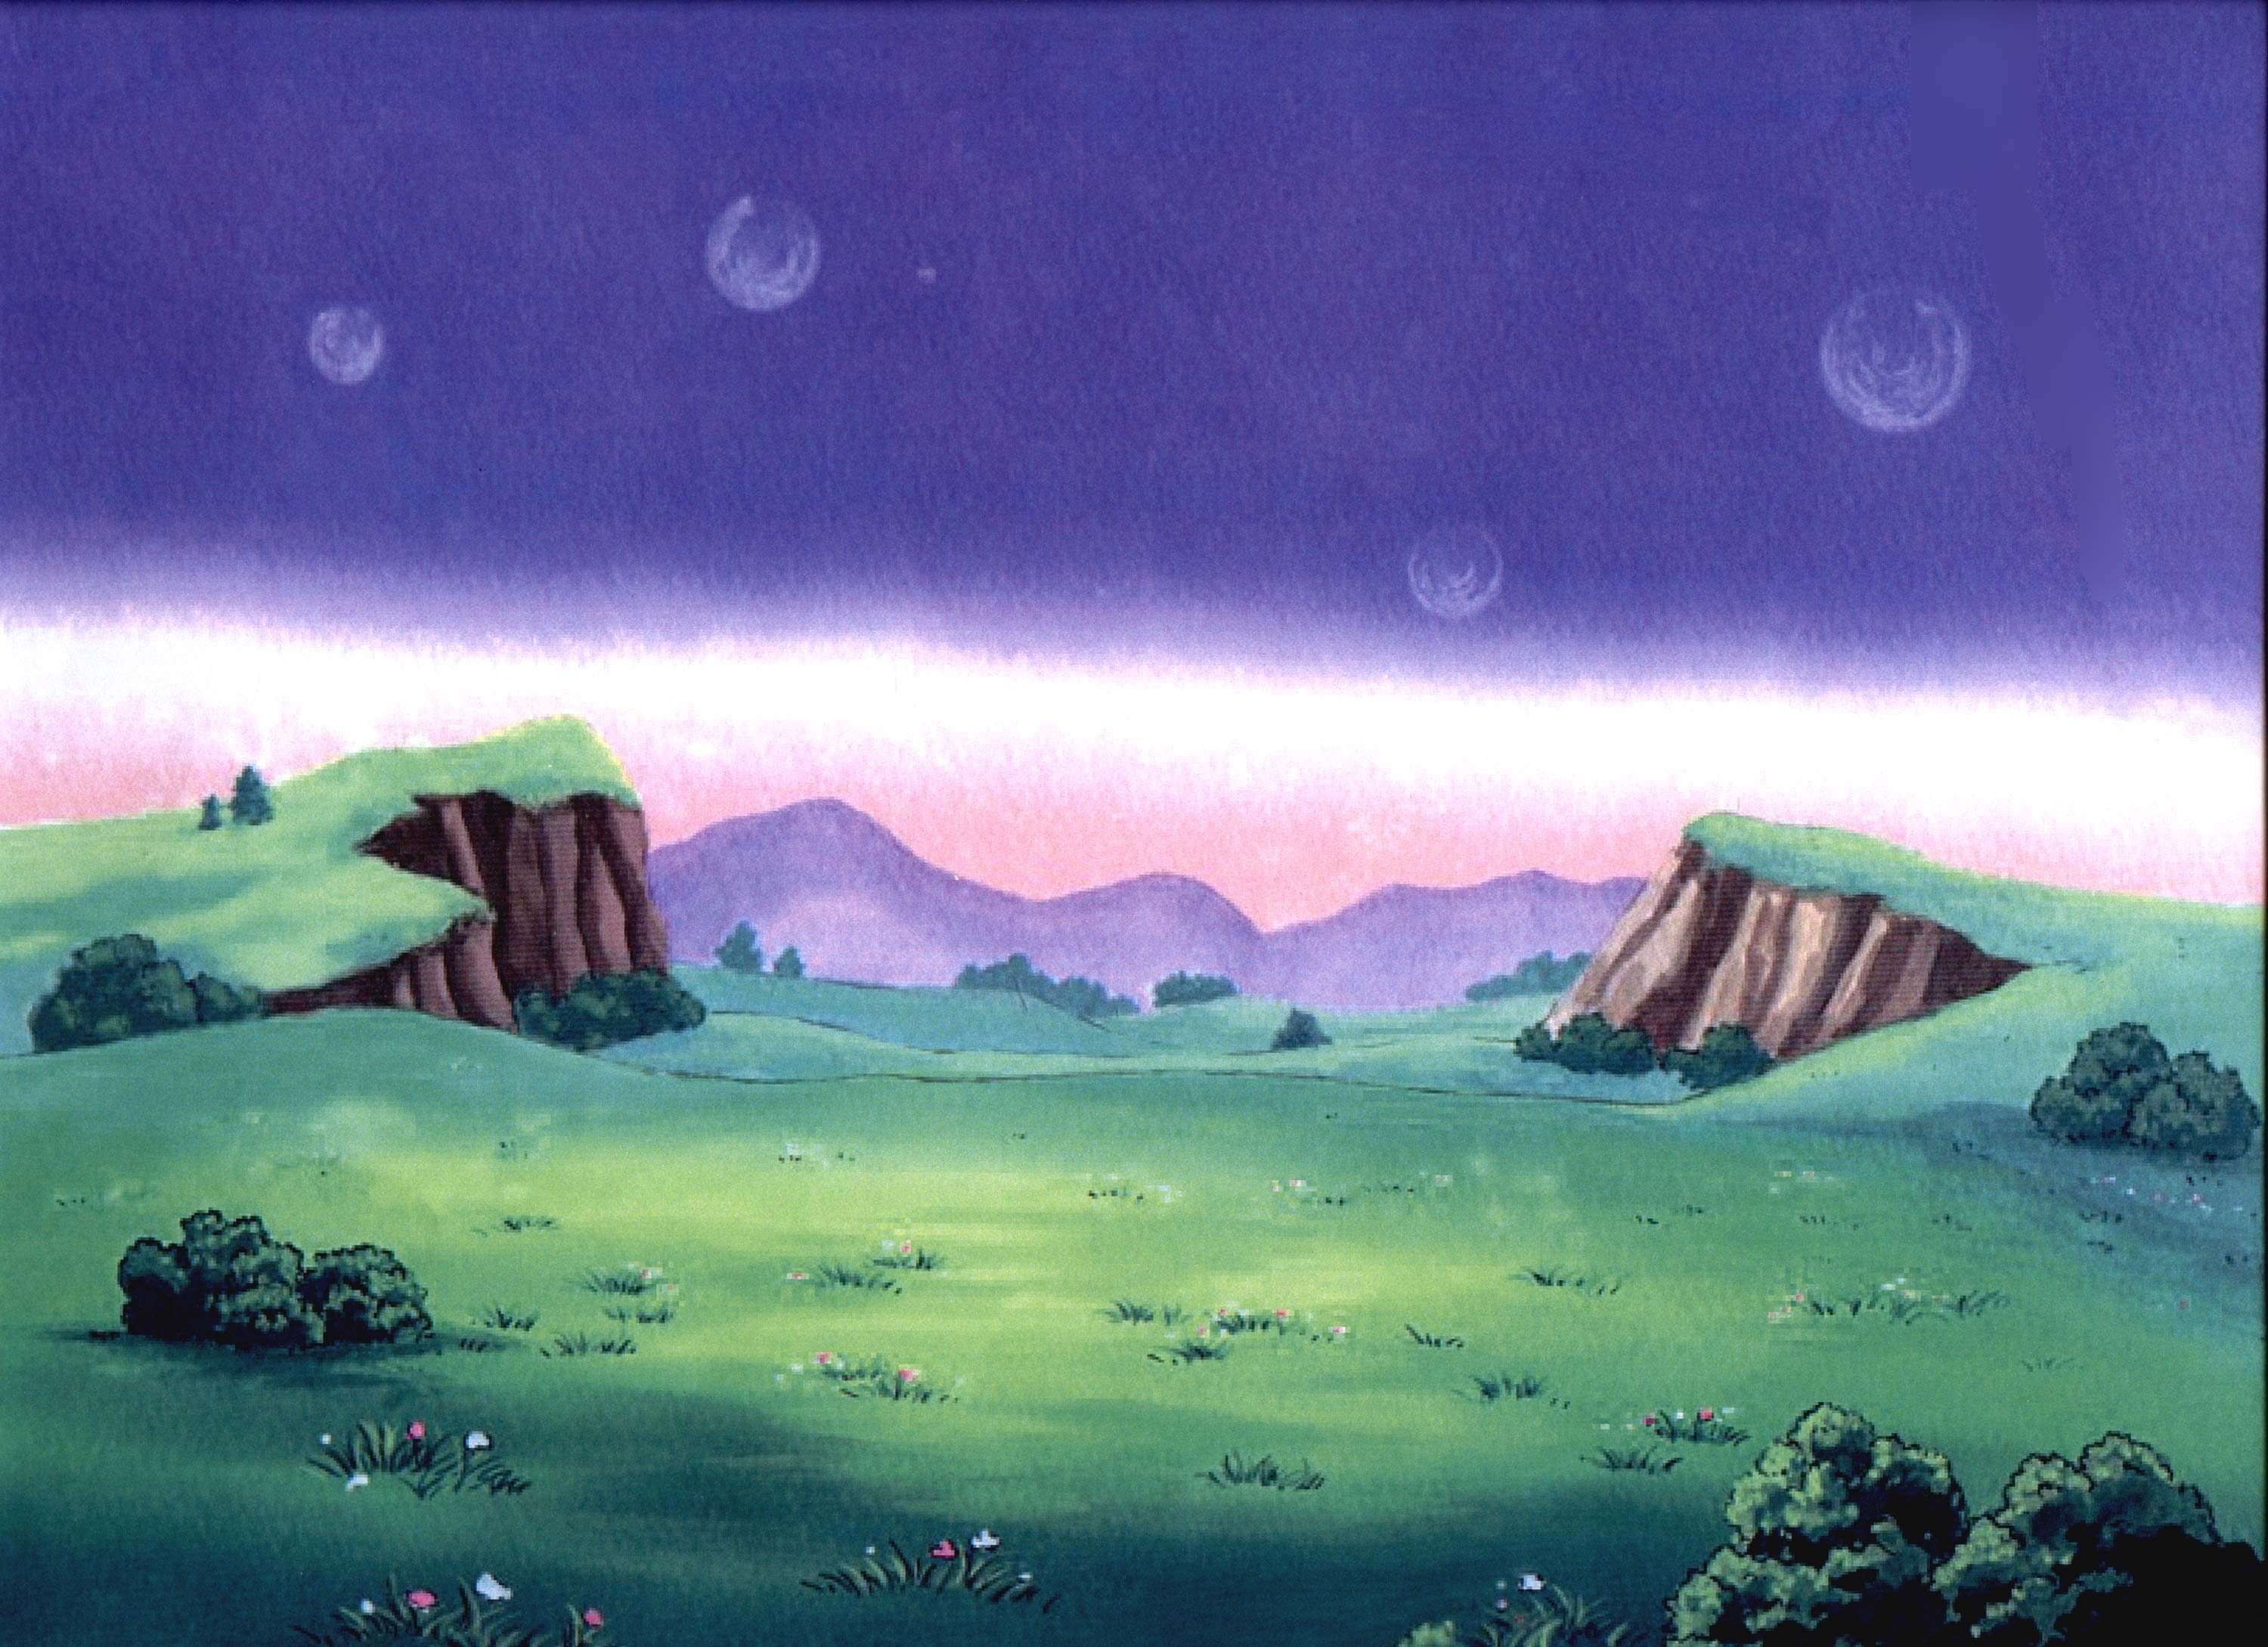 10 Latest Dragon Ball Z Backgrounds FULL HD 1080p For PC Background